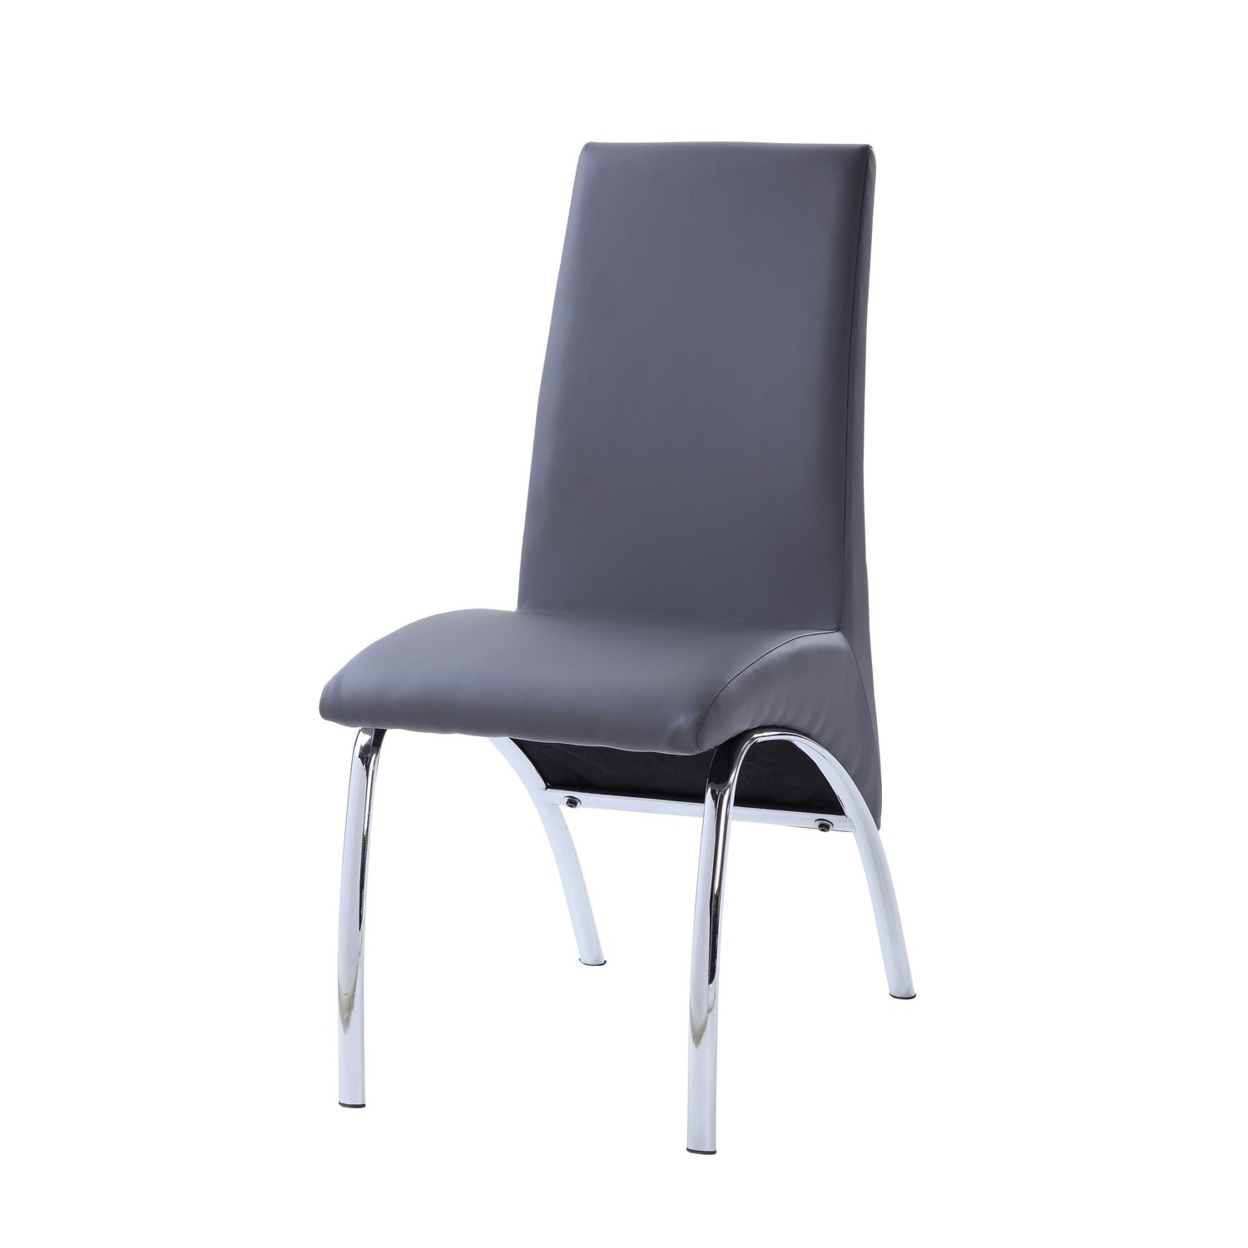 Leatherette Dining Chair With Metal Legs, Set Of 2, Gray And Chrome- Saltoro Sherpi